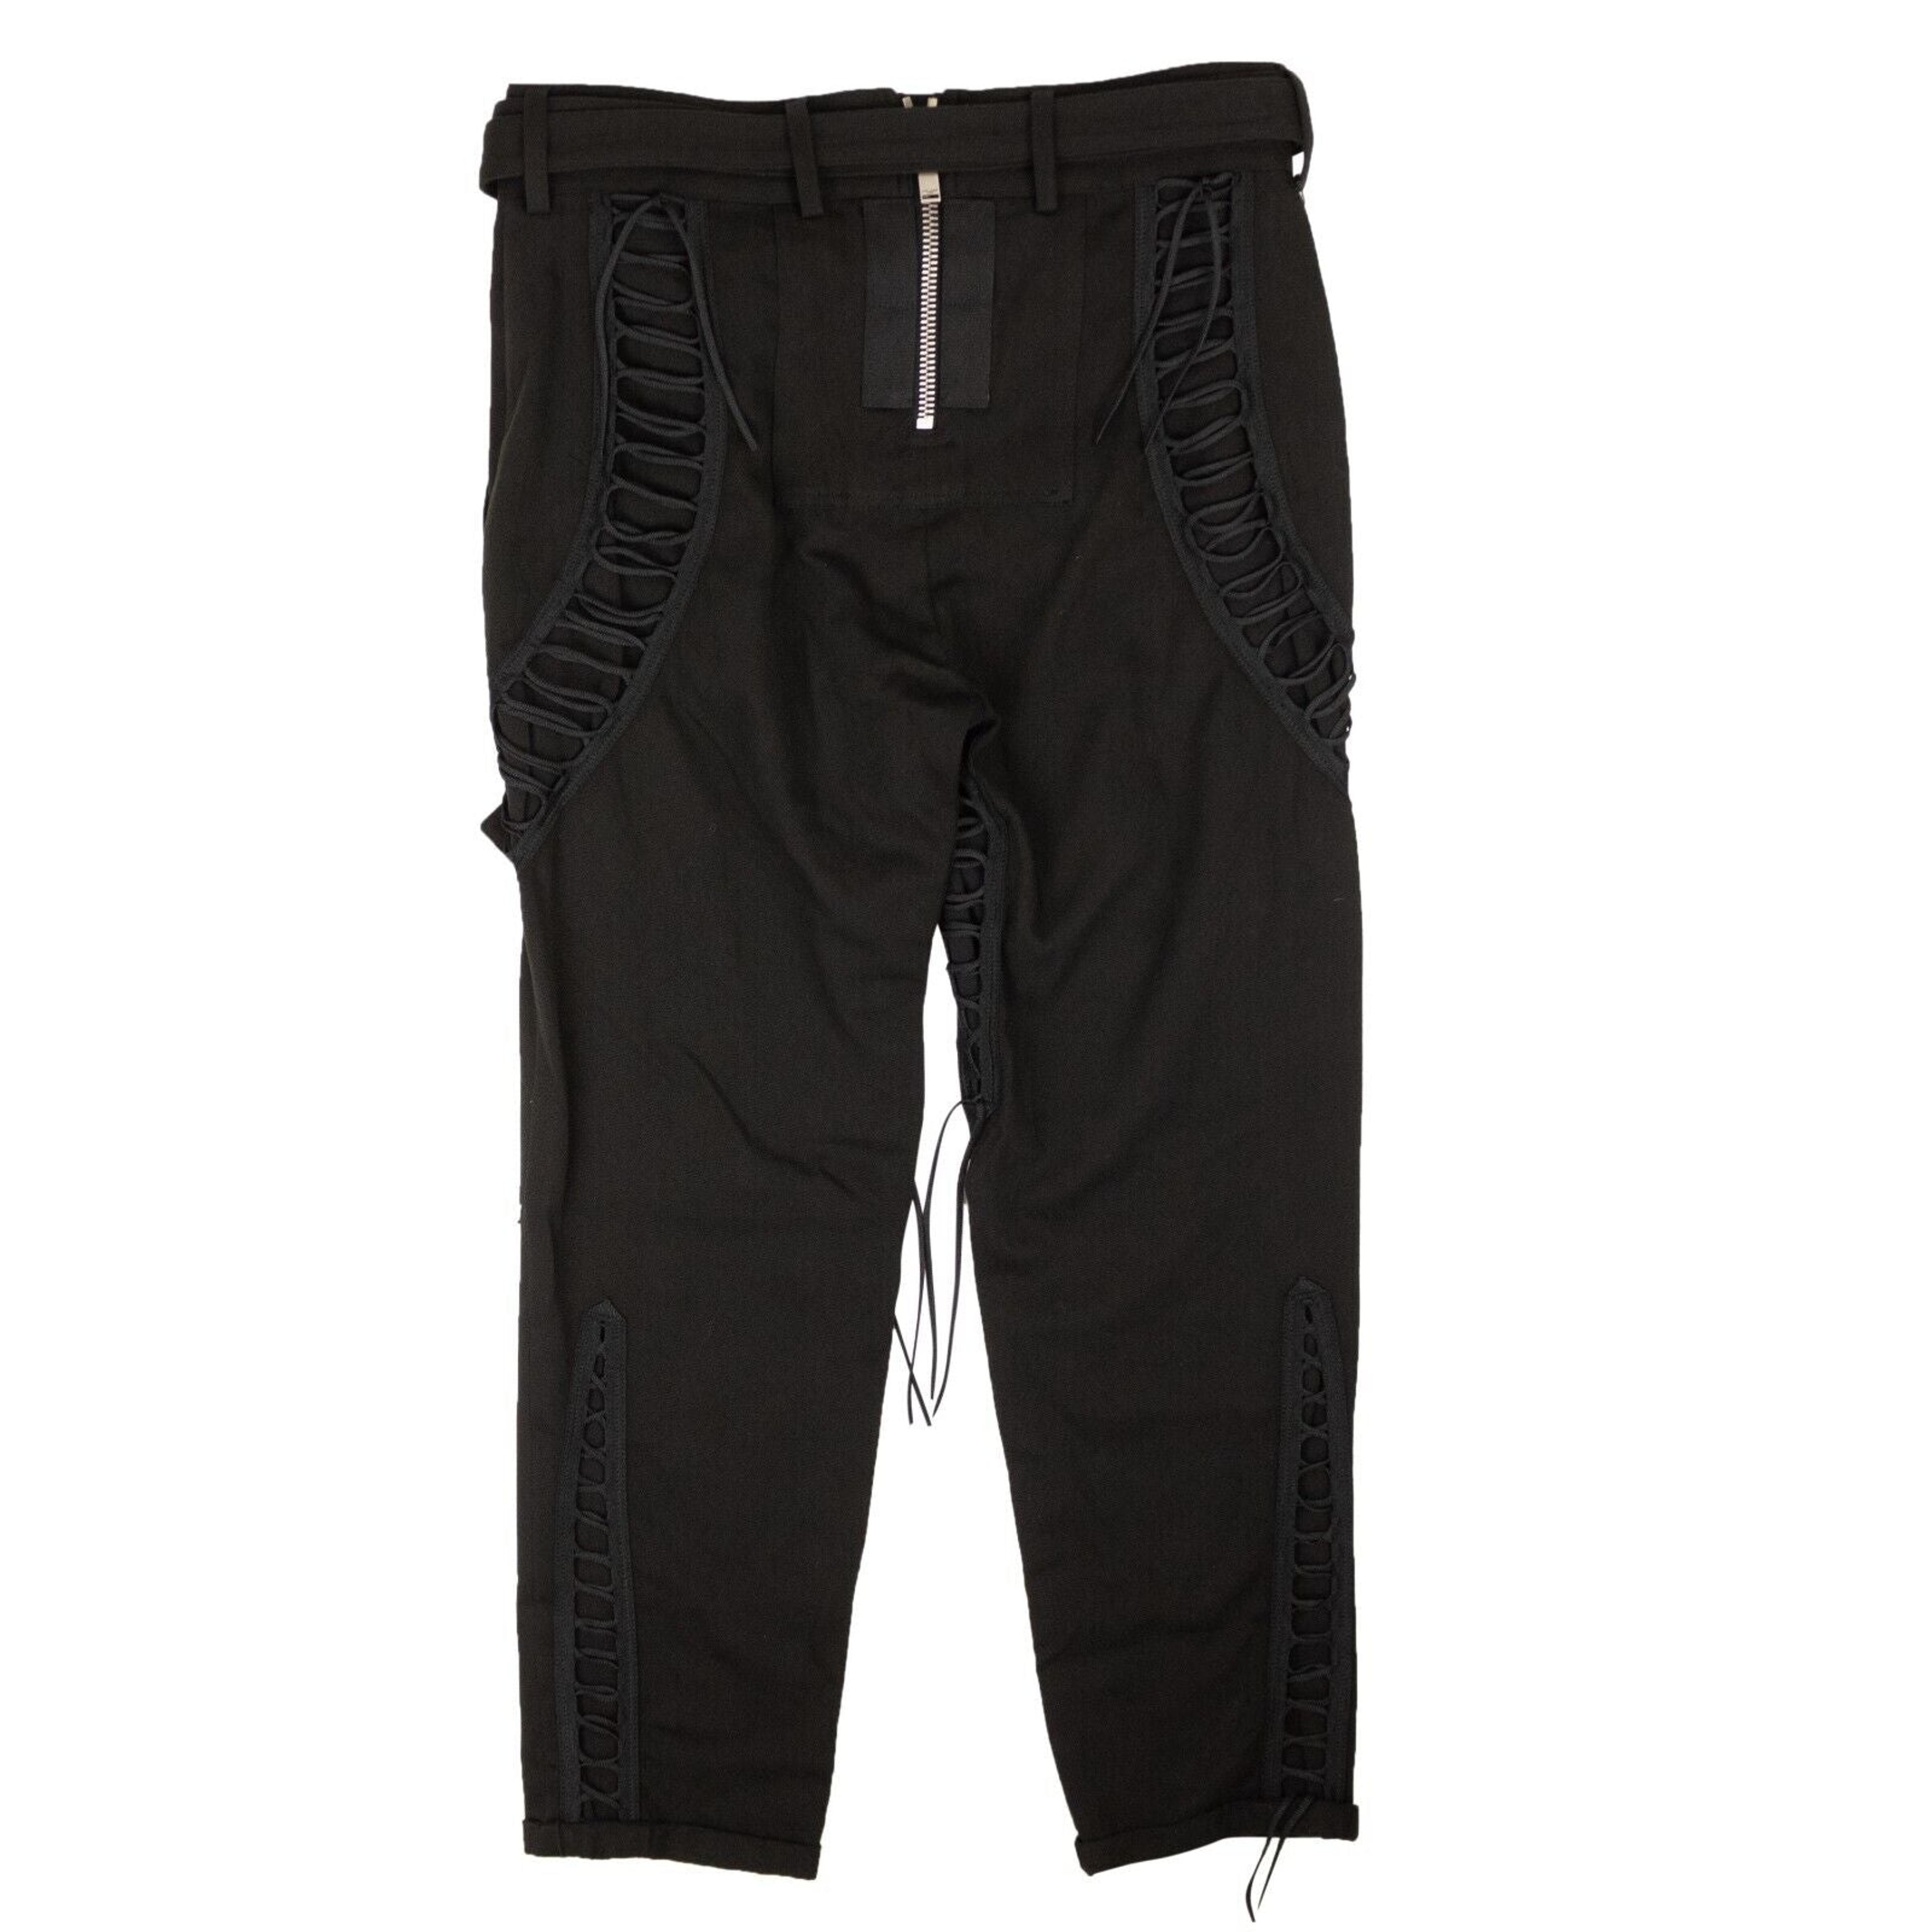 Alternate View 3 of Women's Black Lace-Up Military Pants